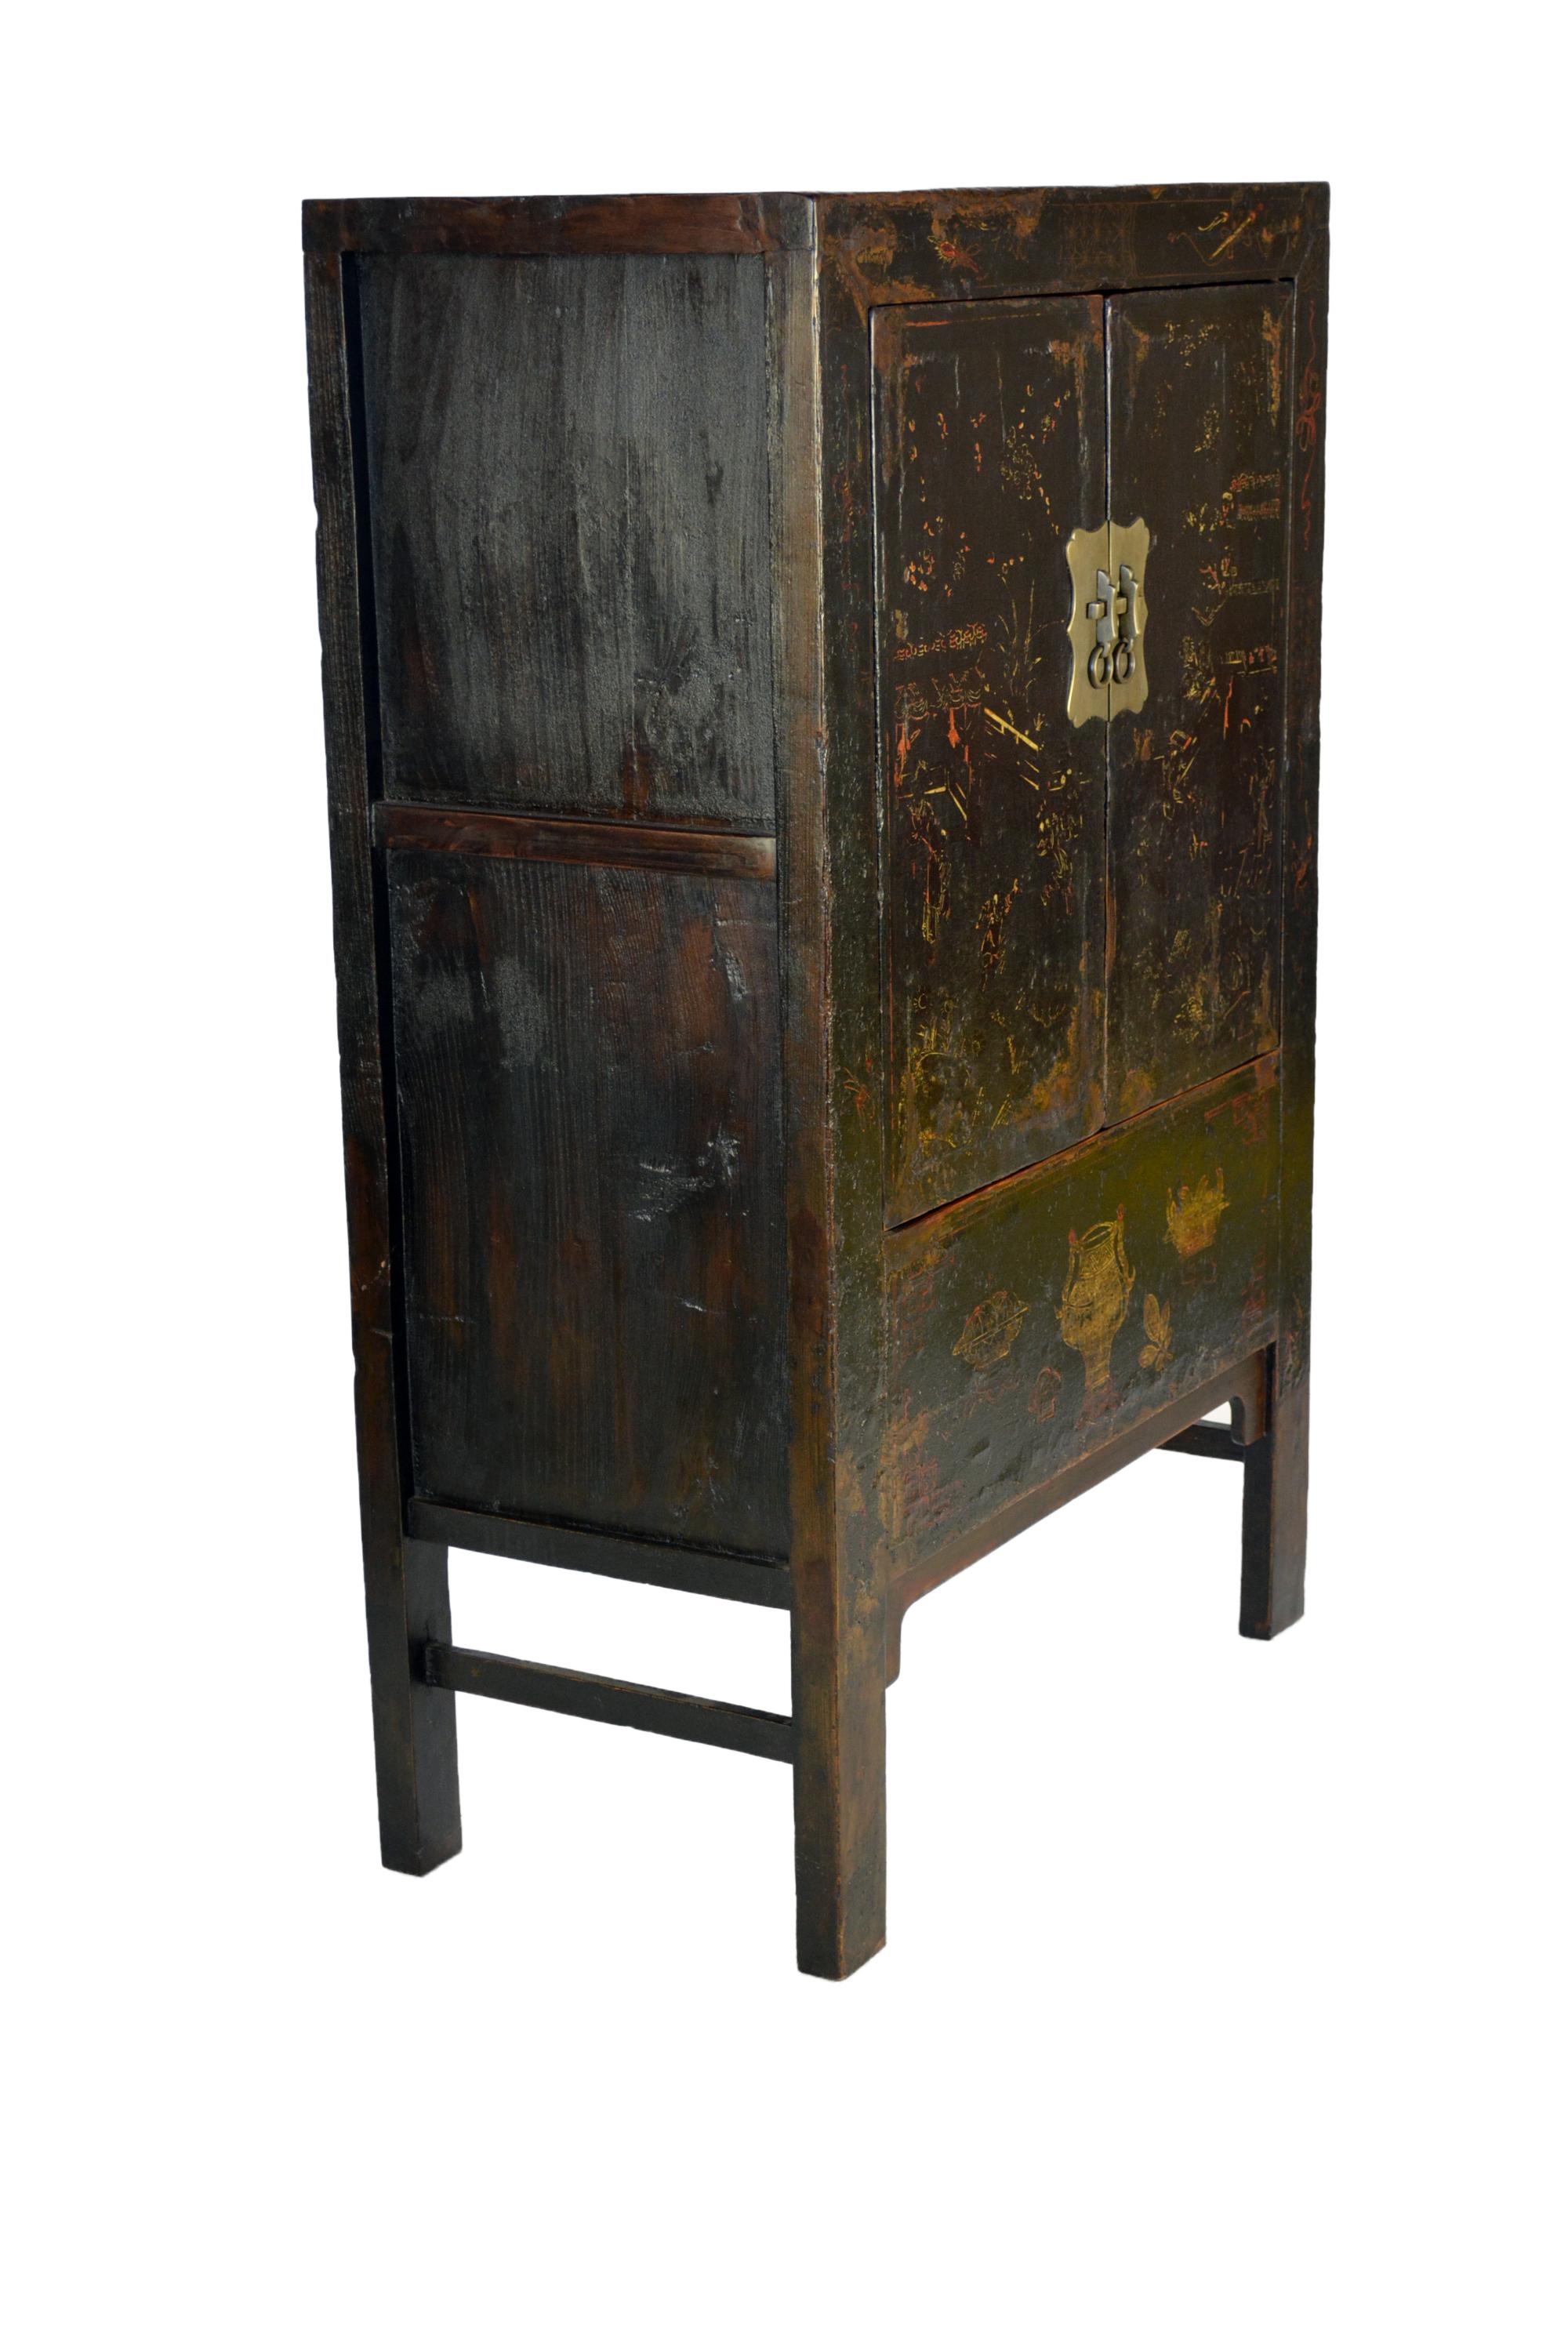 Early 19th Century Black Lacquer Cabinet For Sale 7